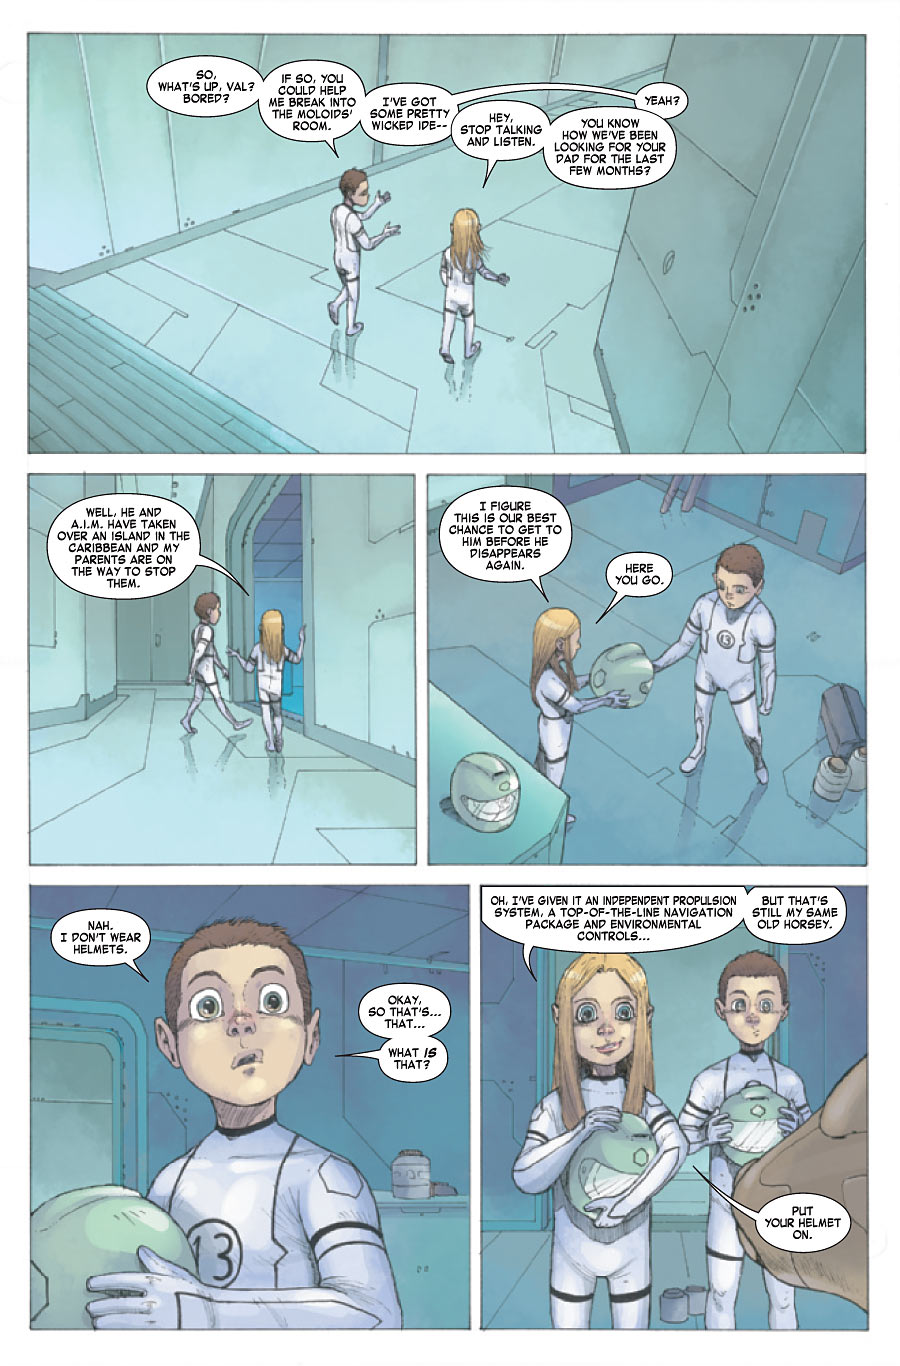 FF #22 page 4